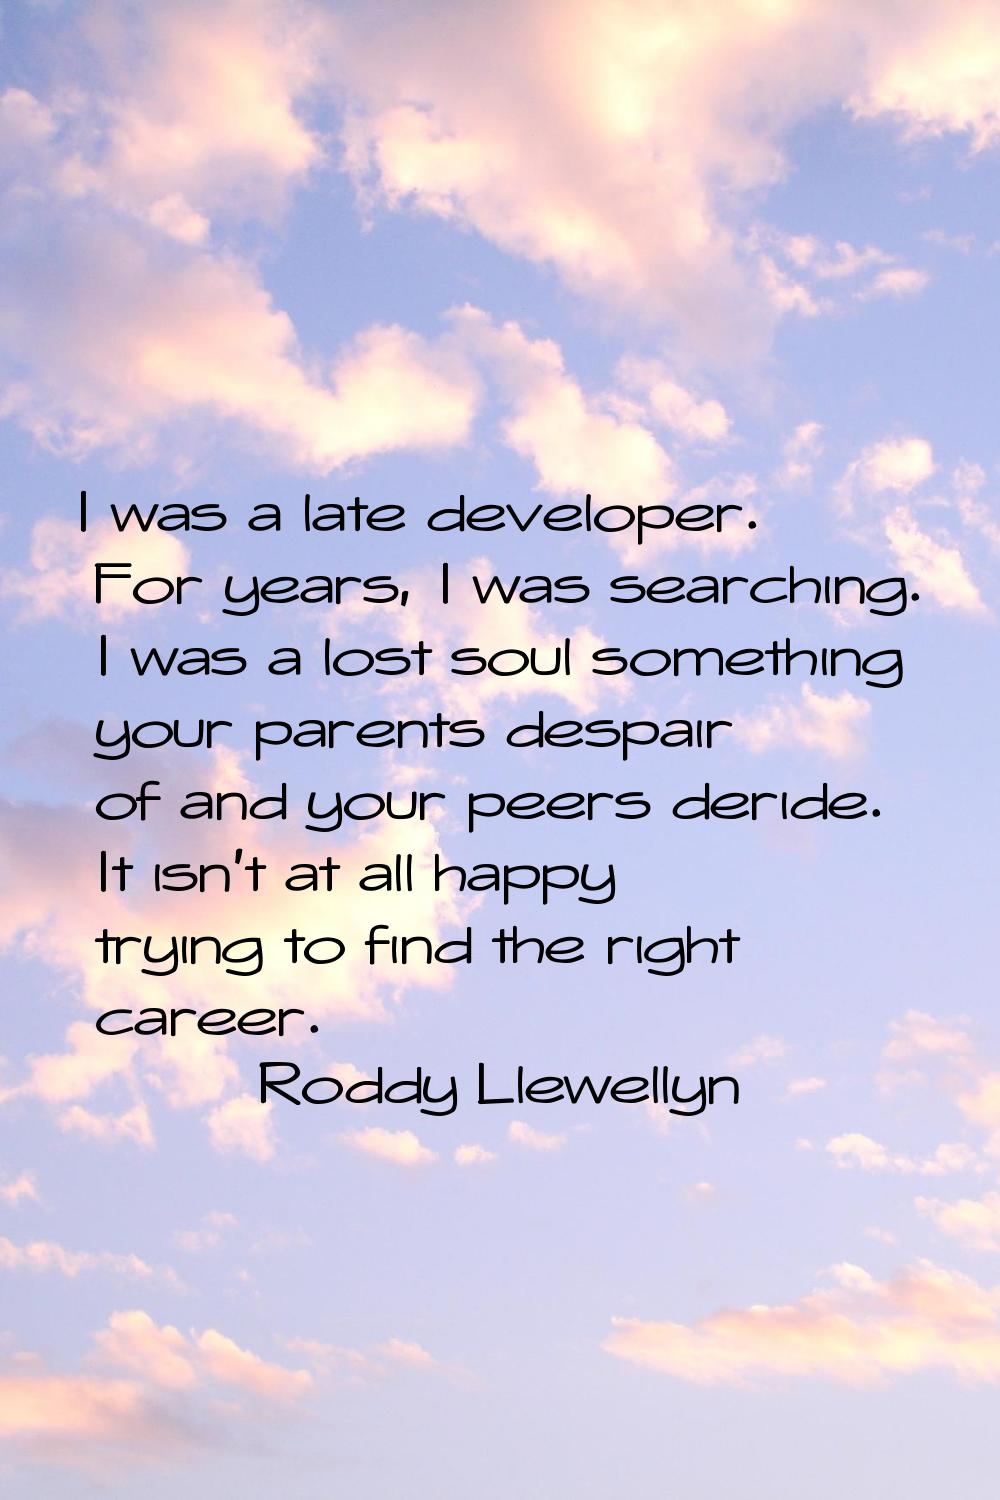 I was a late developer. For years, I was searching. I was a lost soul something your parents despai